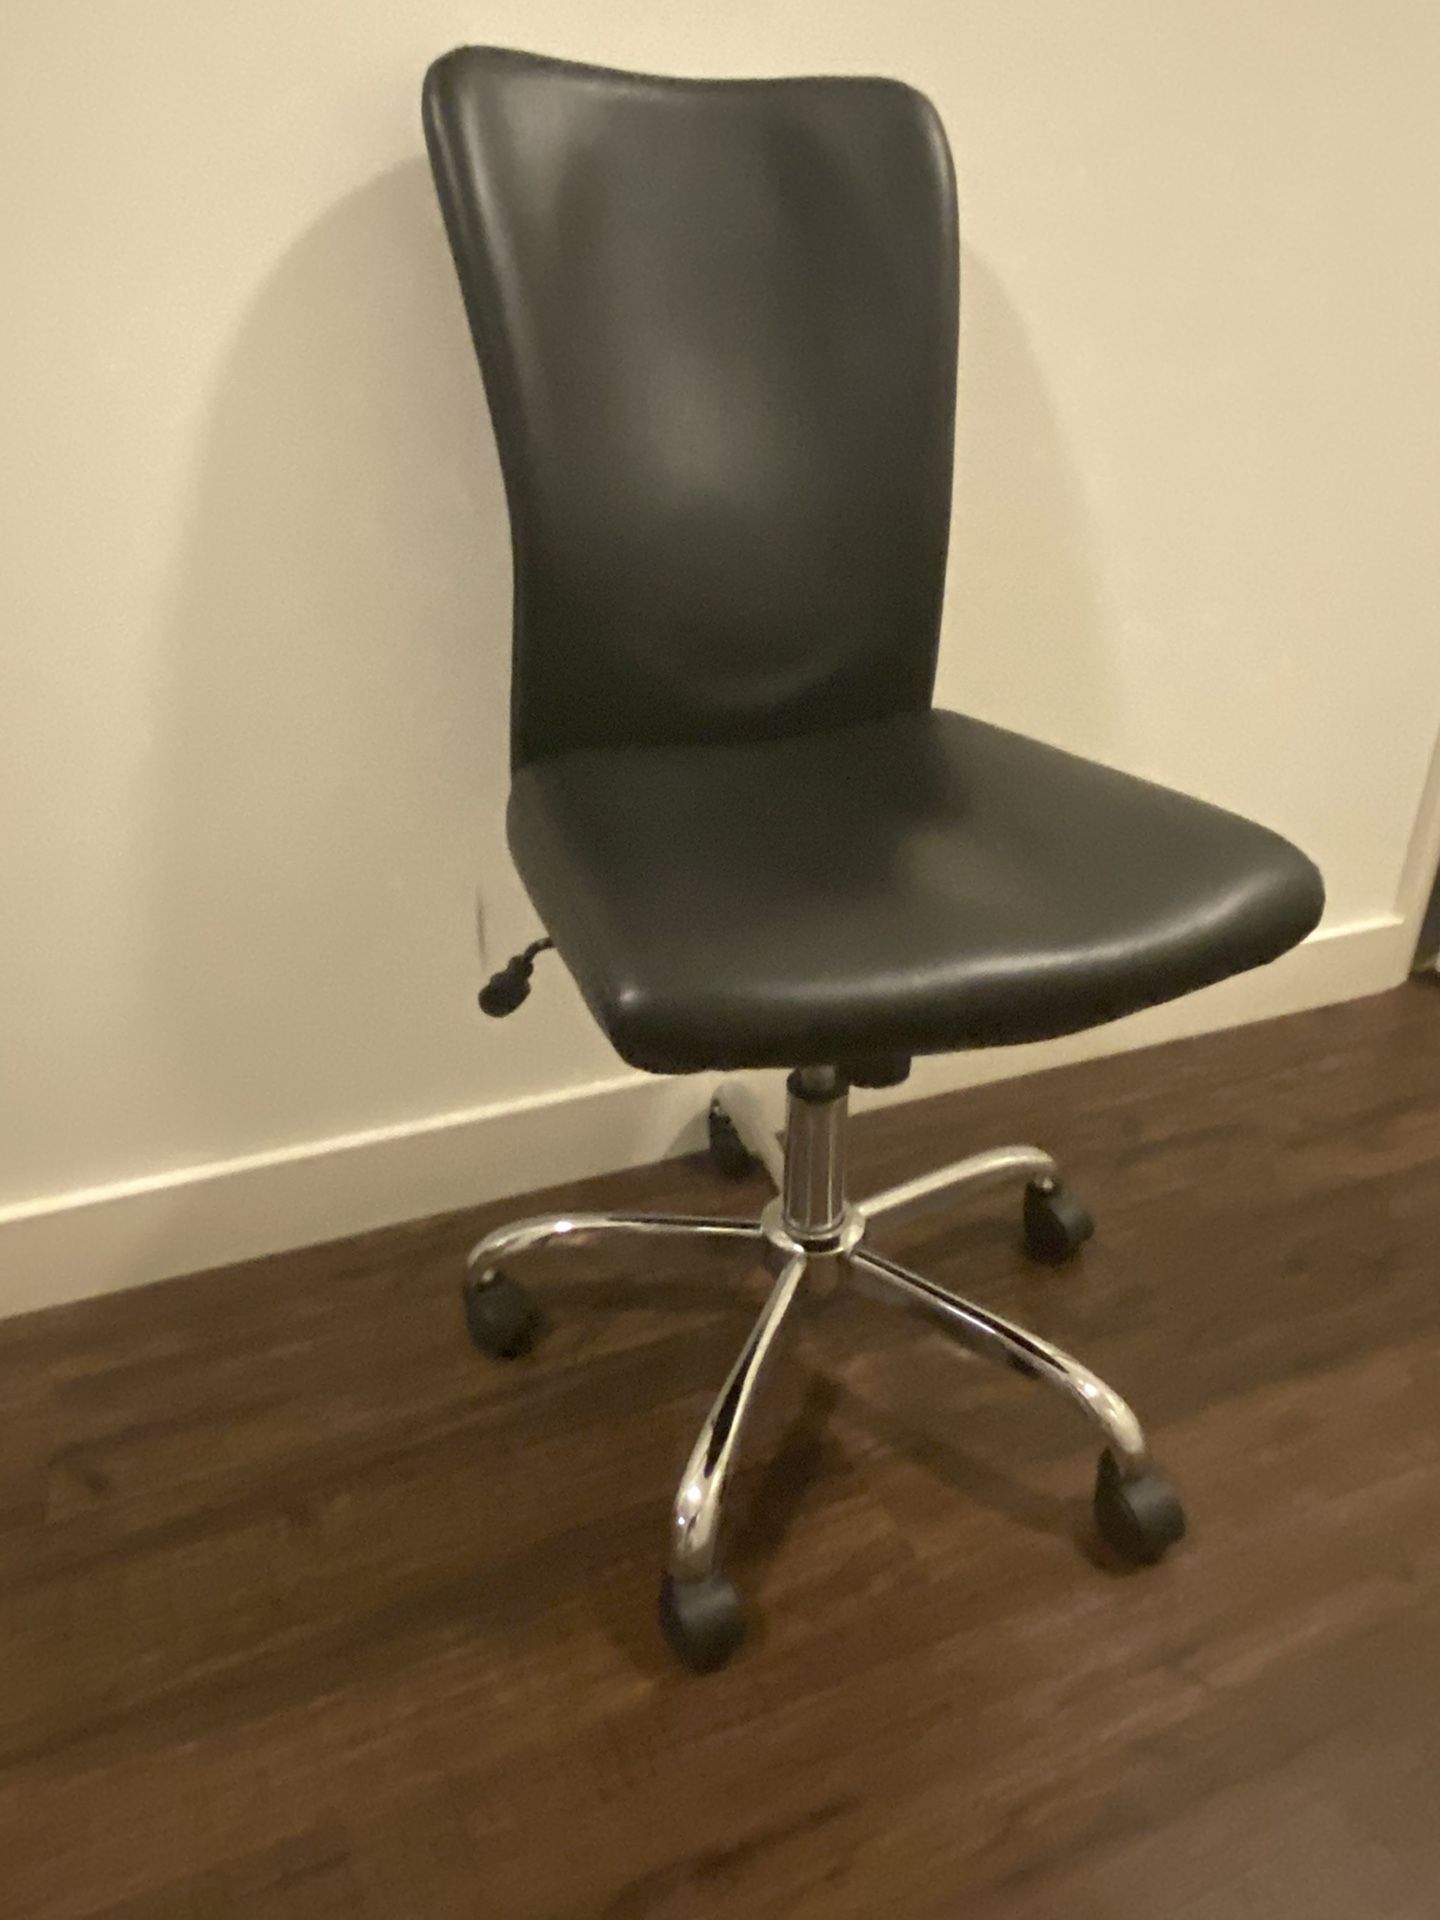 Office Chair - $15